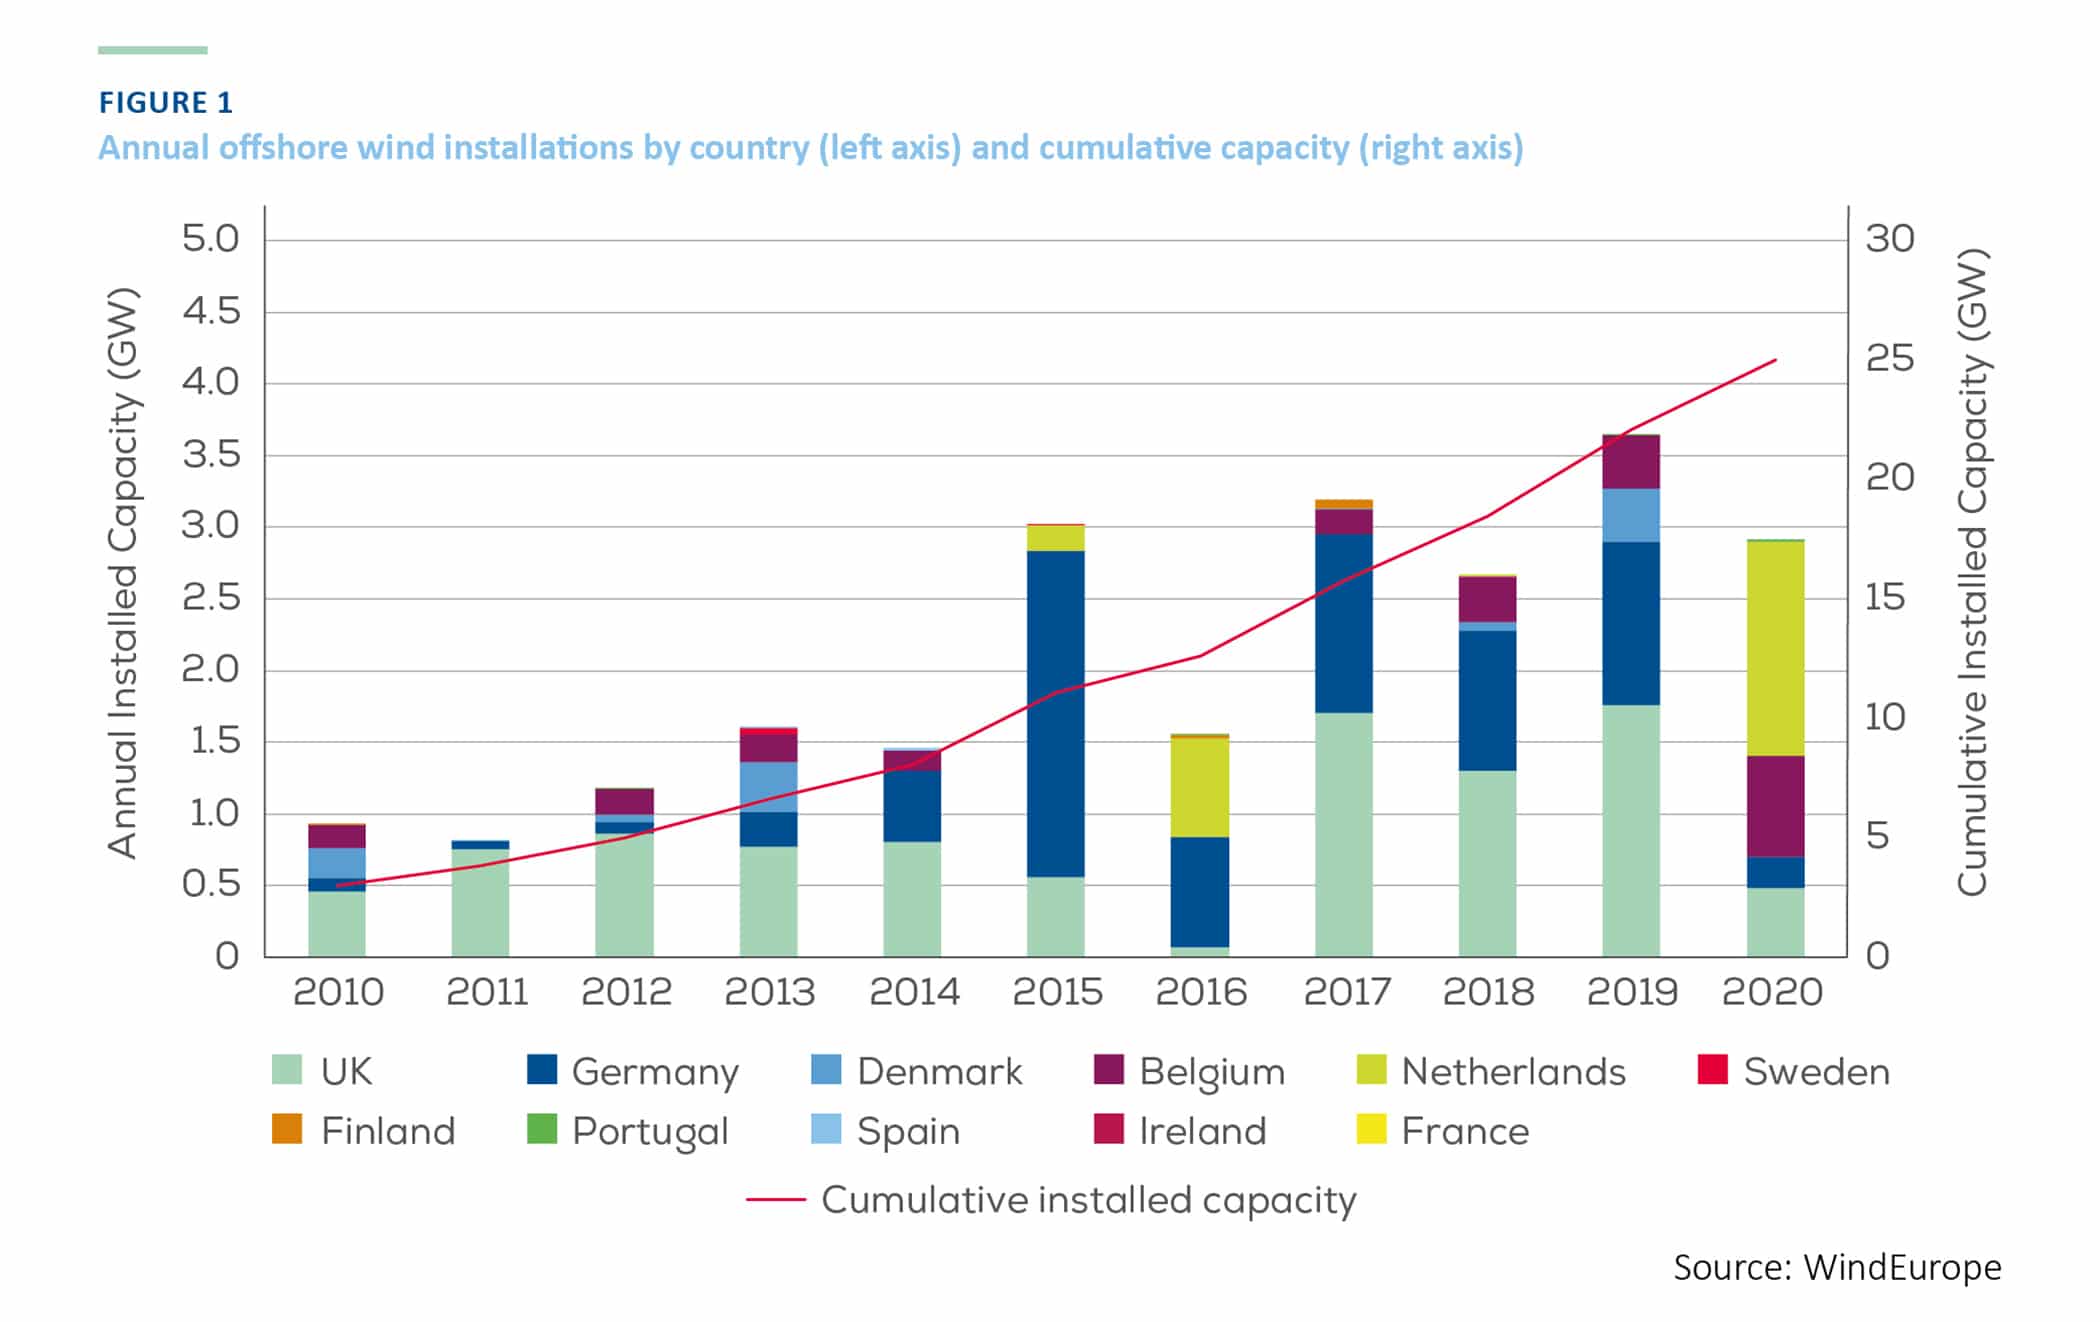 Annual offshore wind installations by country (left axis) and cumulative capacity (right axis) (GW)